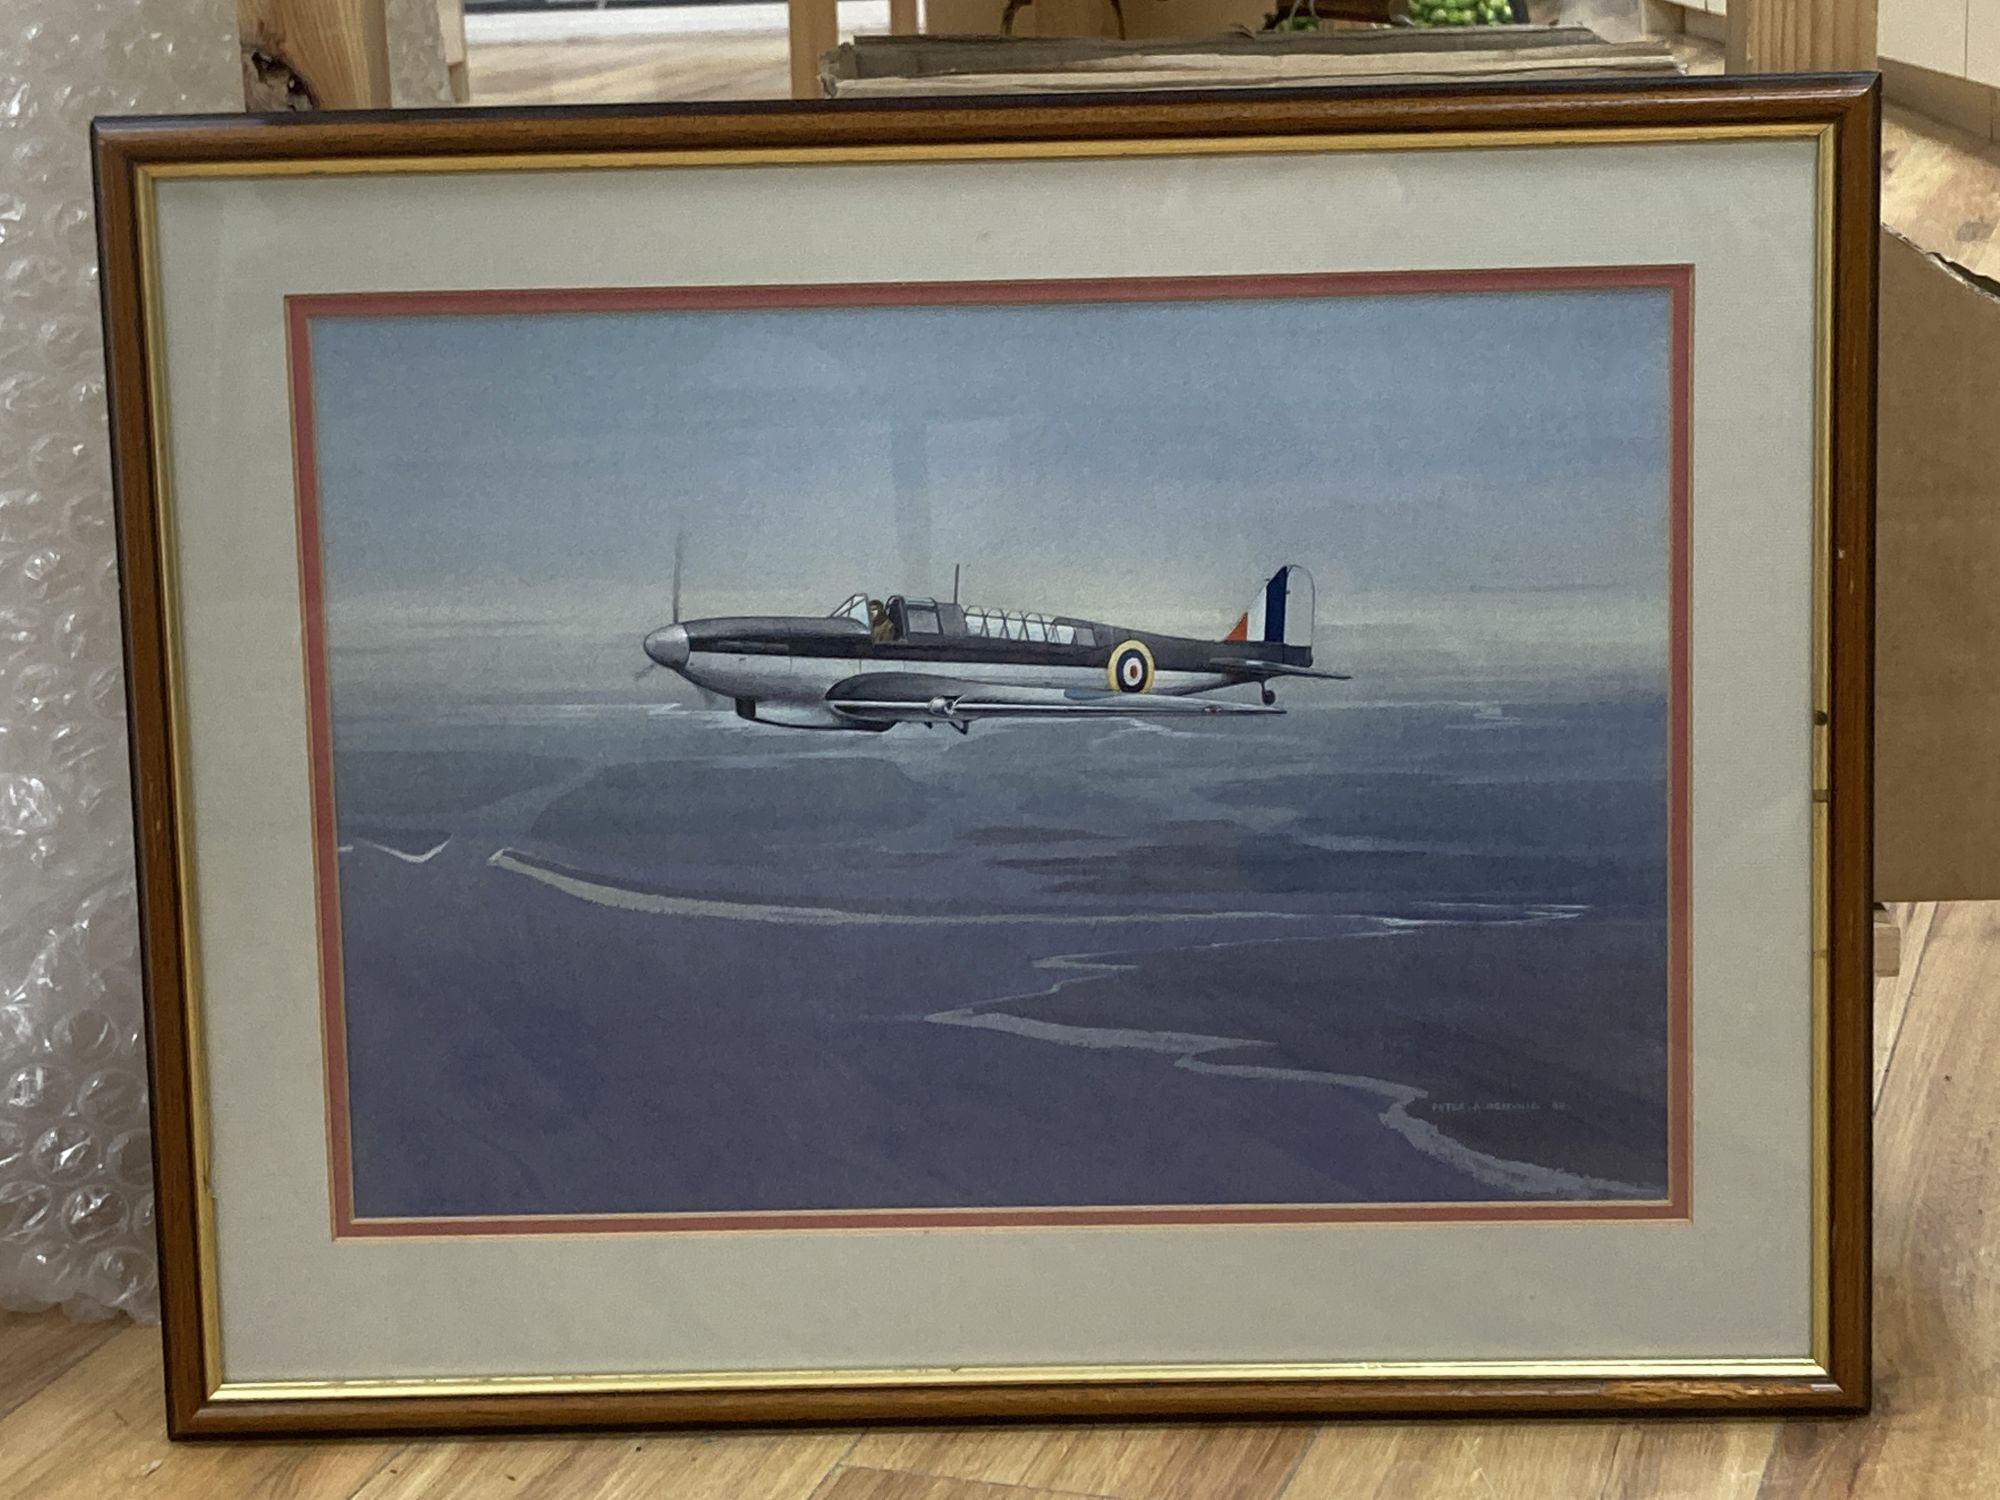 Peter A Henville (1925-2000), watercolour, Fairey Aviation Co Carrier Fighter Bomber, signed and dated 89, 33 x 48cm